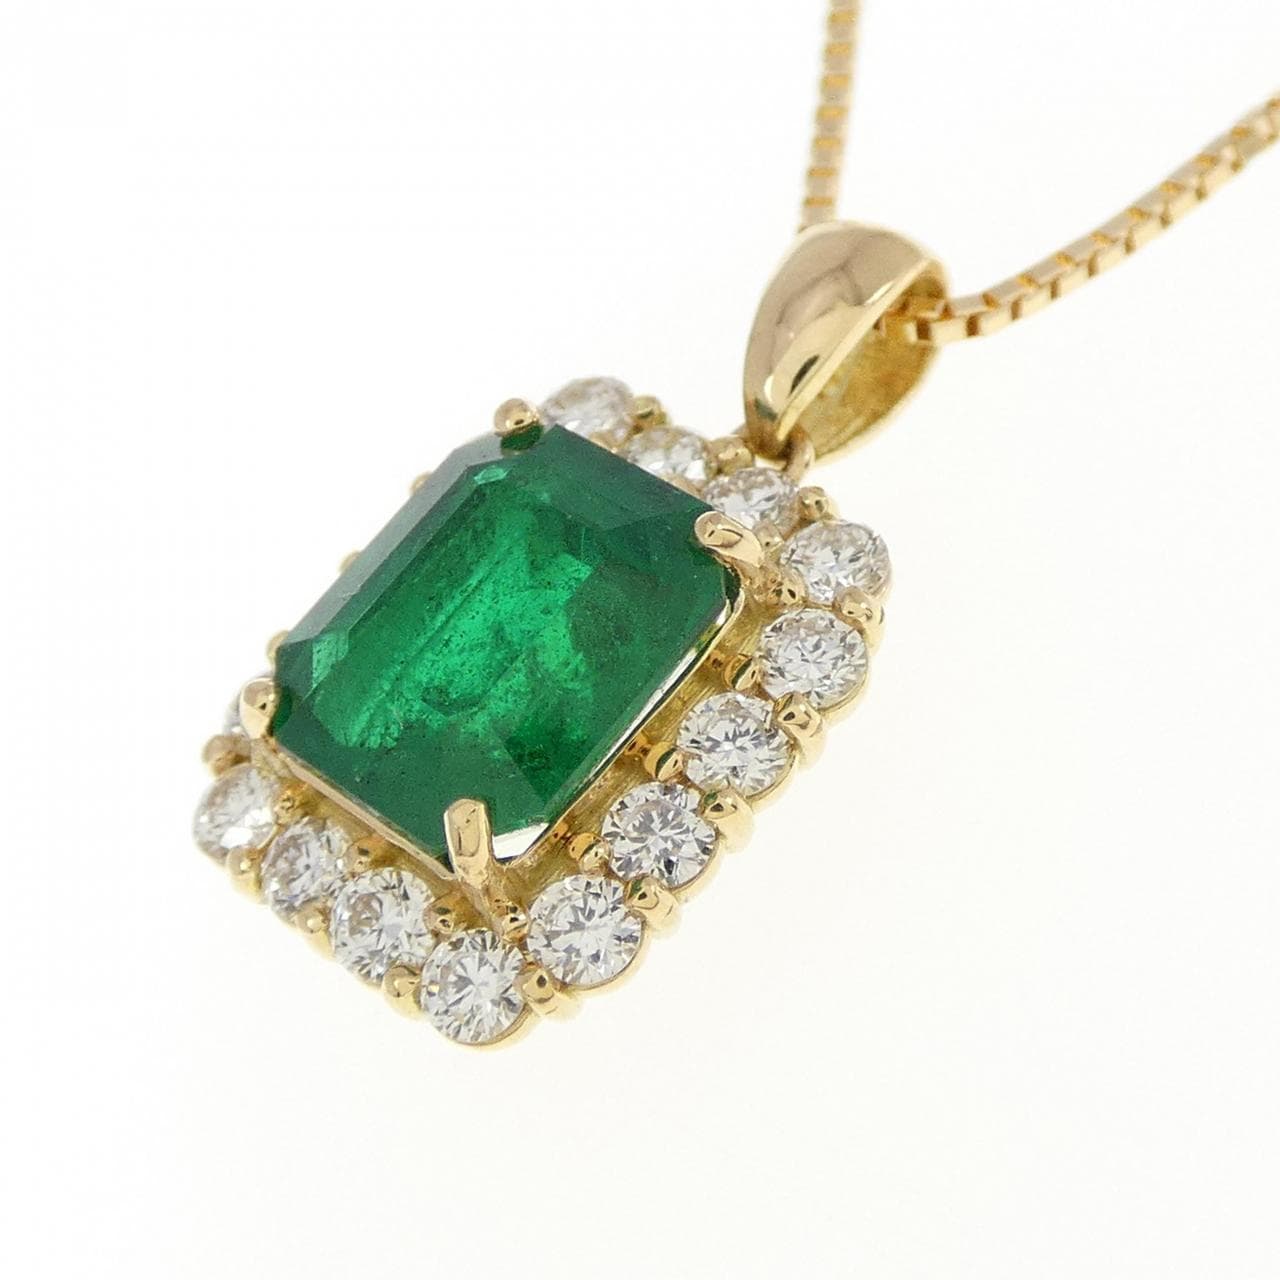 [Remake] K18YG emerald necklace 1.575CT Made in Zambia